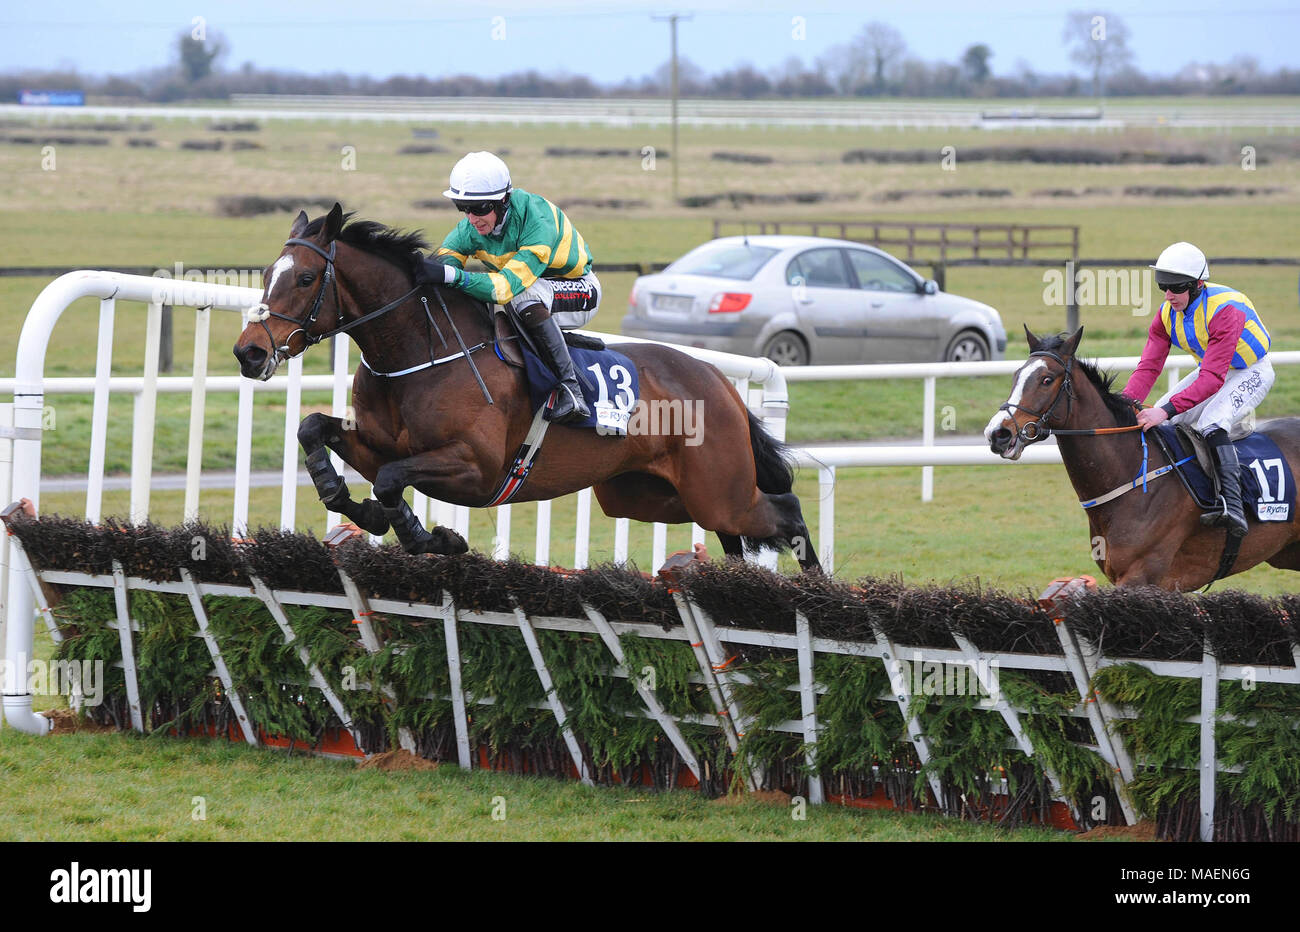 Uisce Betha ridden by JJ Slevin clears the last hurdle to win the Ryans Cleaning Event Specialists Maiden Hurdle during Ryan Air Gold Cup Day of the 2018 Easter Festival at Fairyhouse Racecourse, Ratoath, Co. Meath. Stock Photo